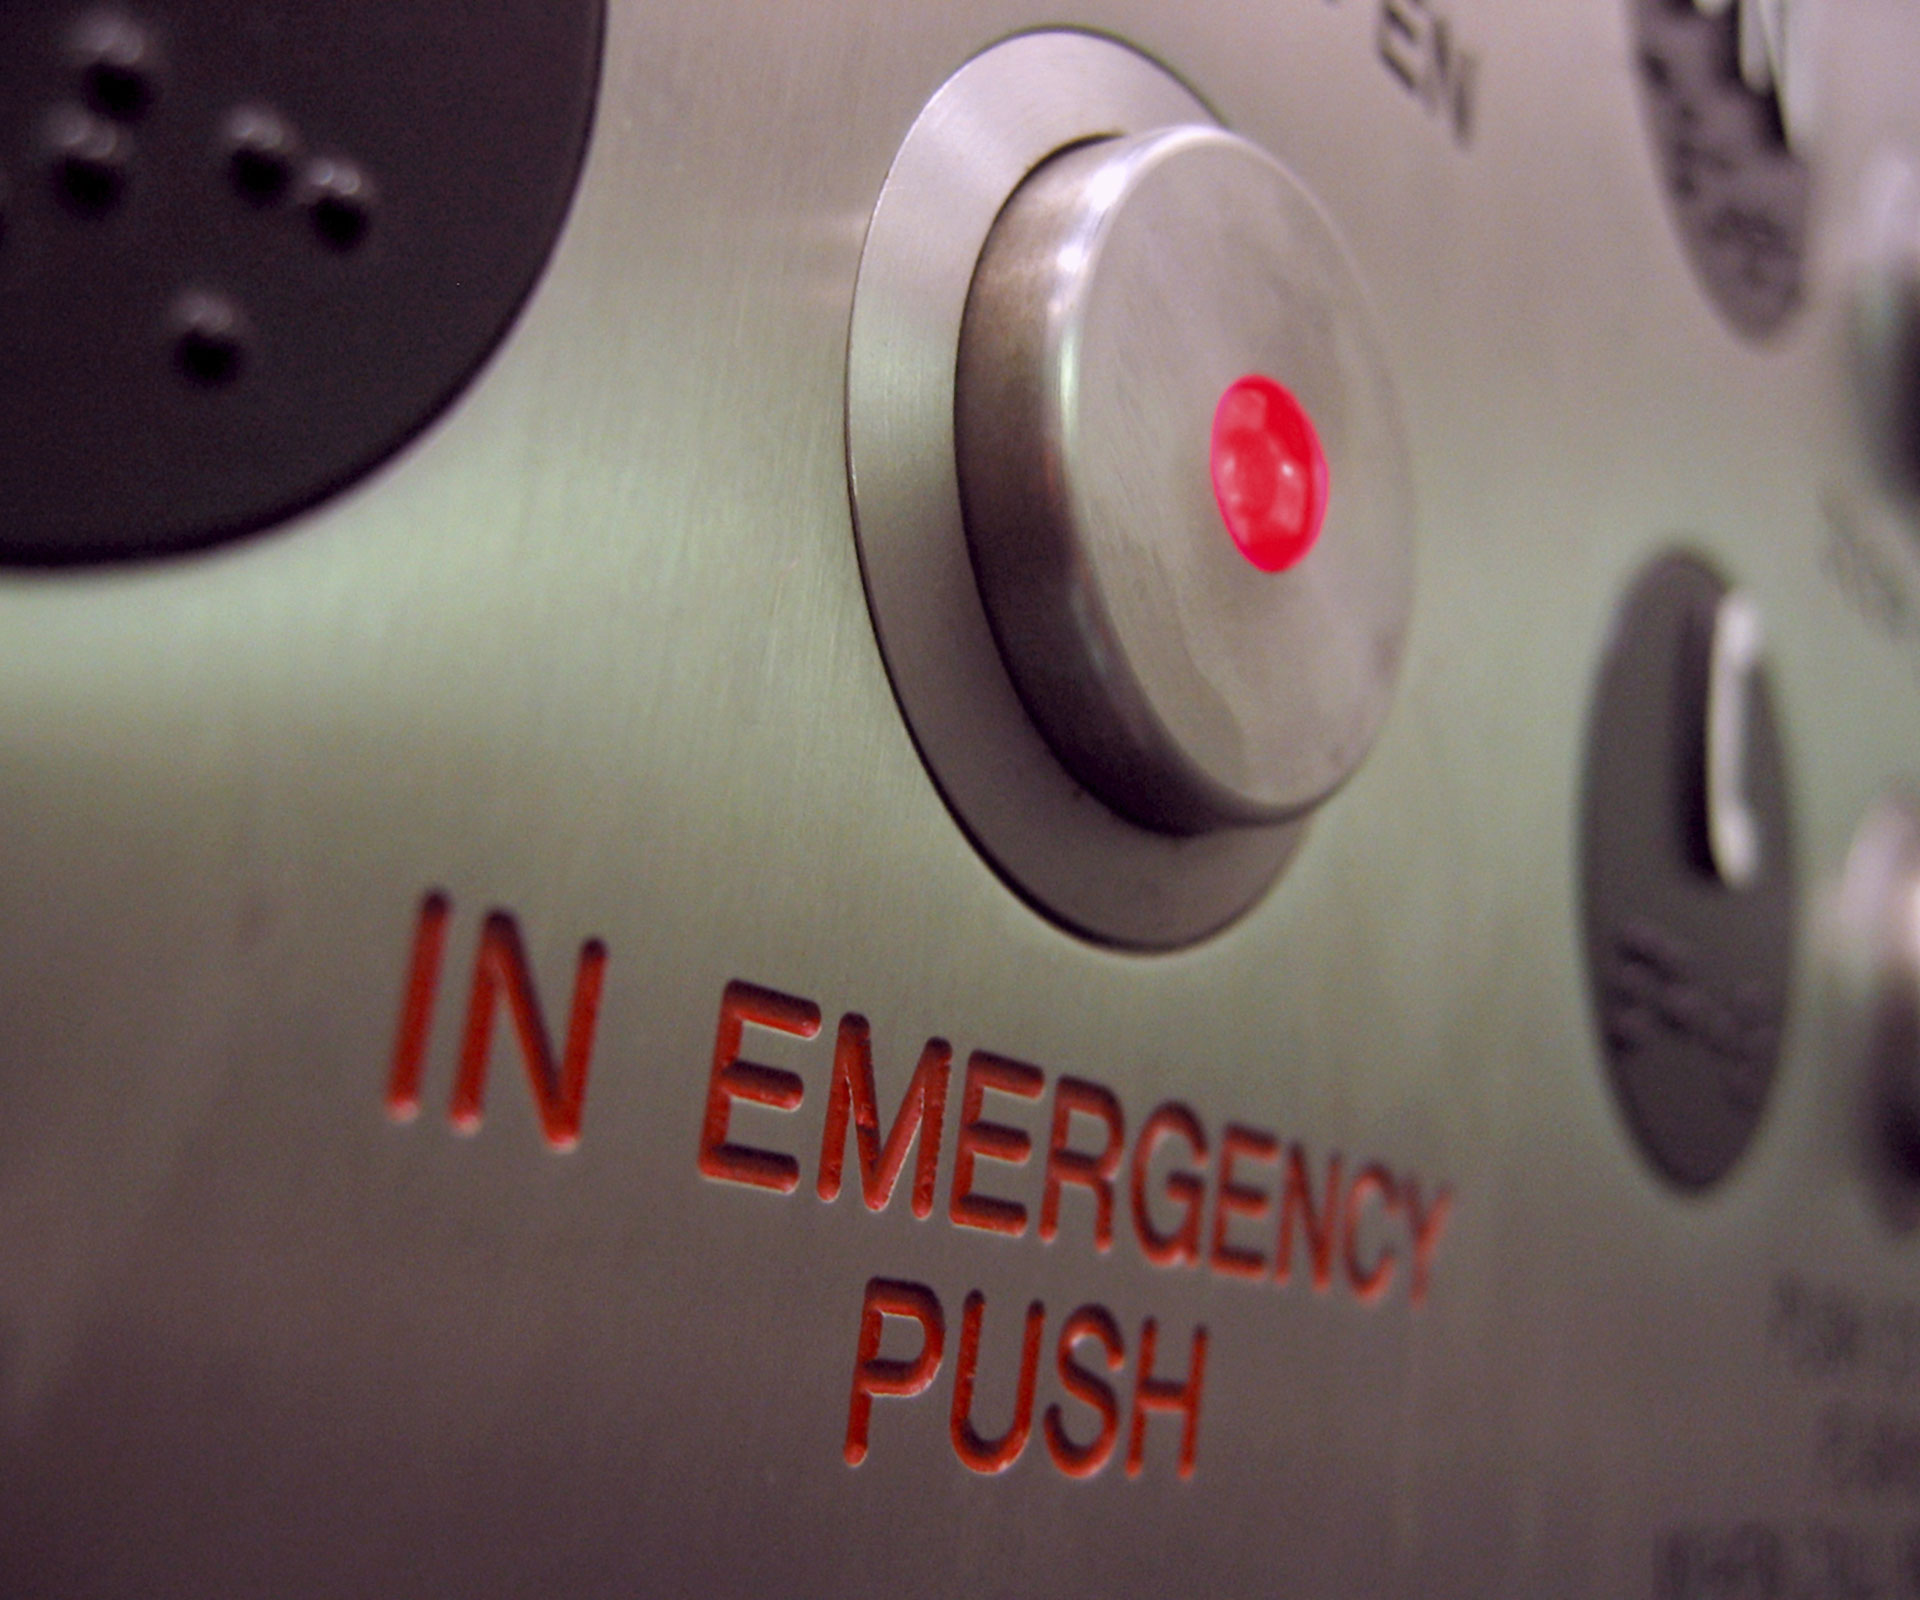 Woman dies after a month trapped in lift